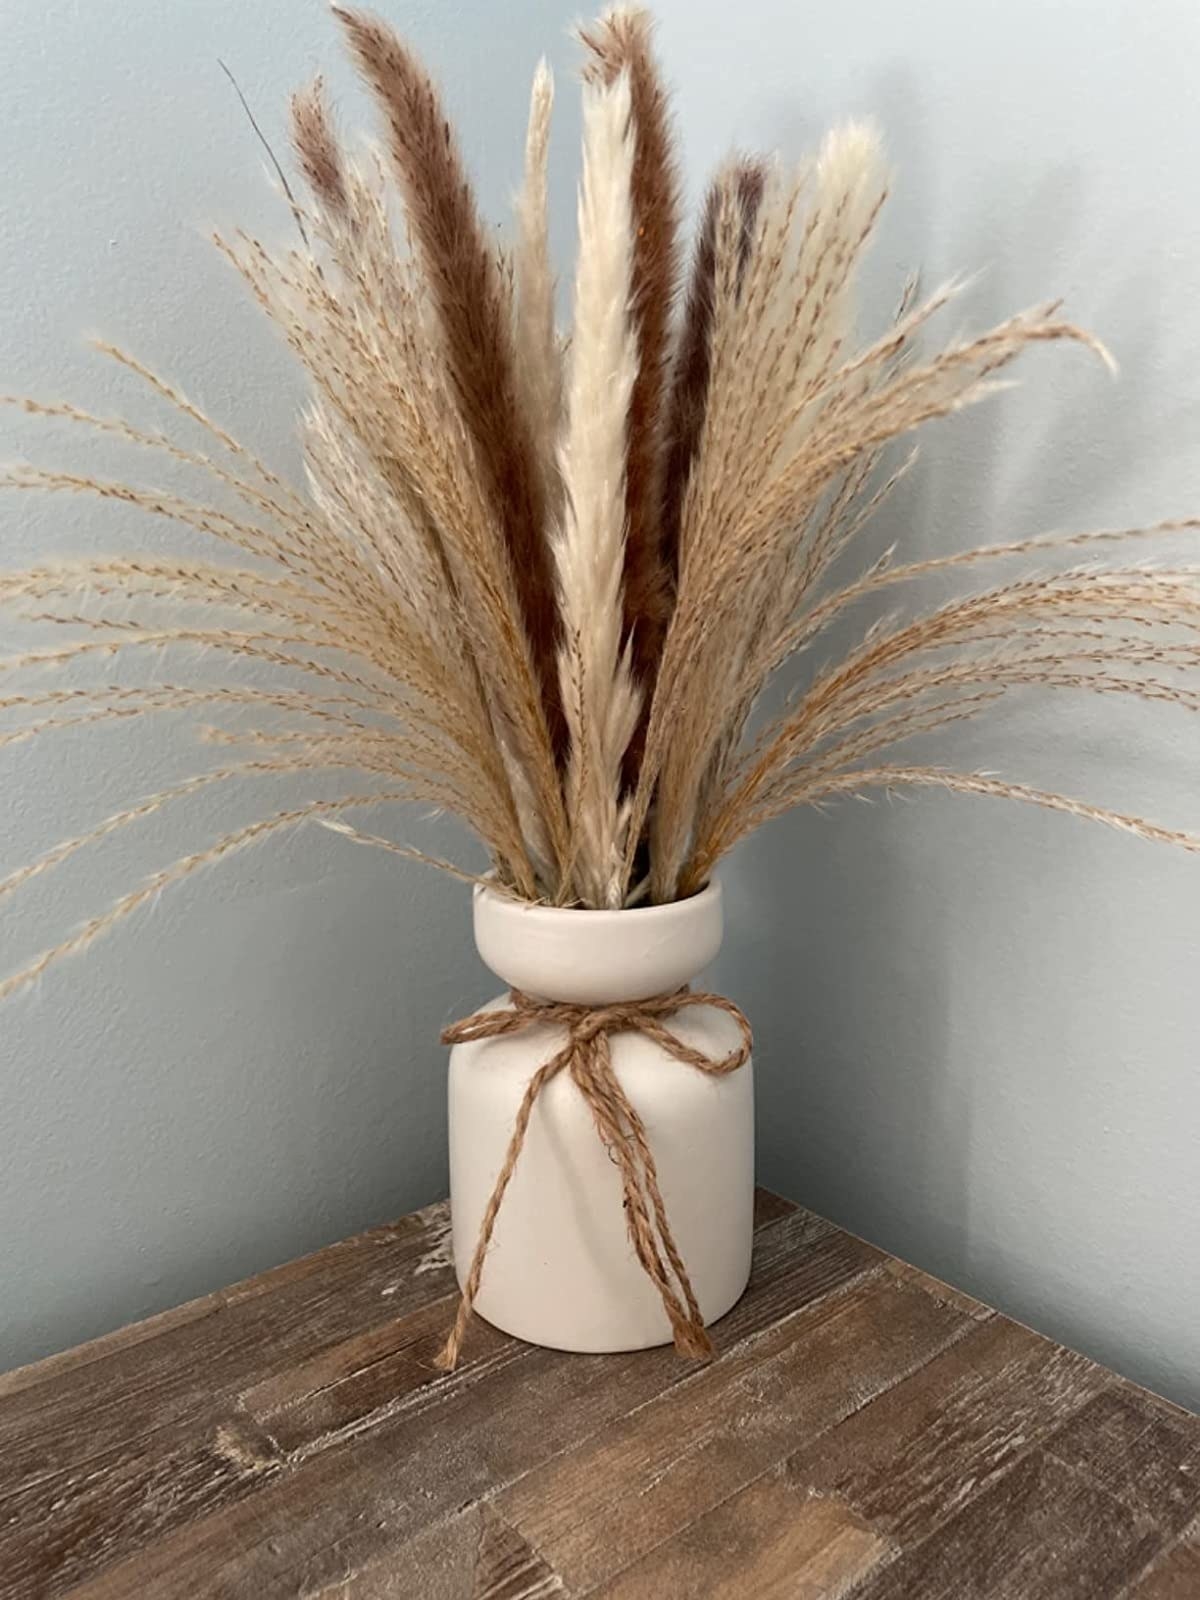 Reviewer&#x27;s dried grasses are shown in a vase